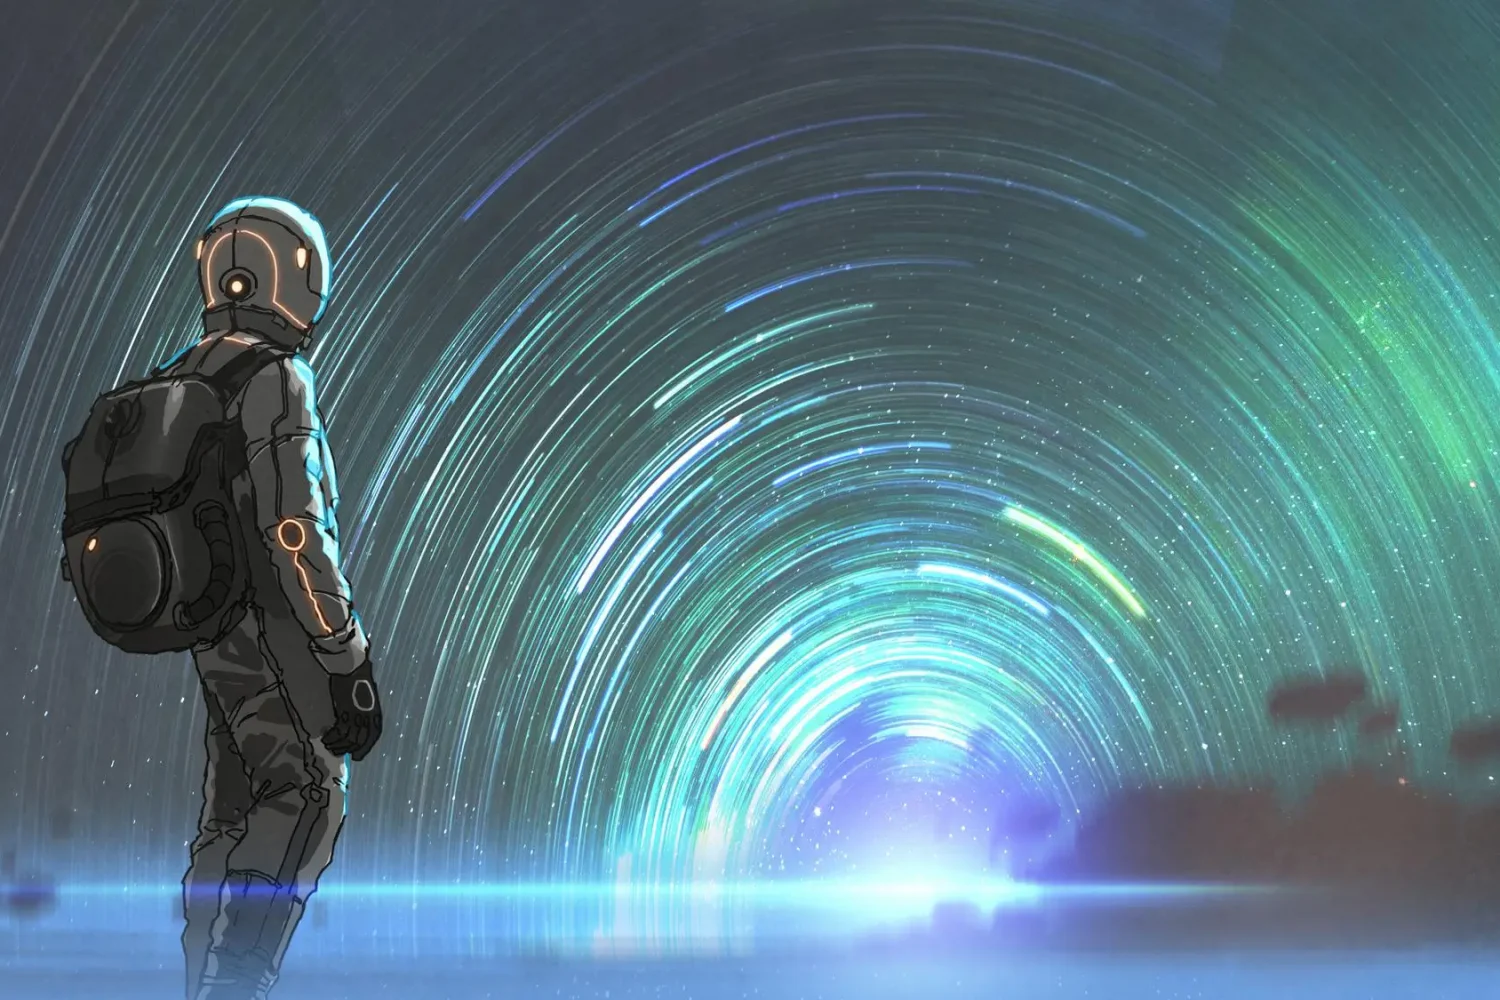 science-fiction-scene-astronaut-standing-front-starry-tunnel-entrance-digital-art-style-illustration-1